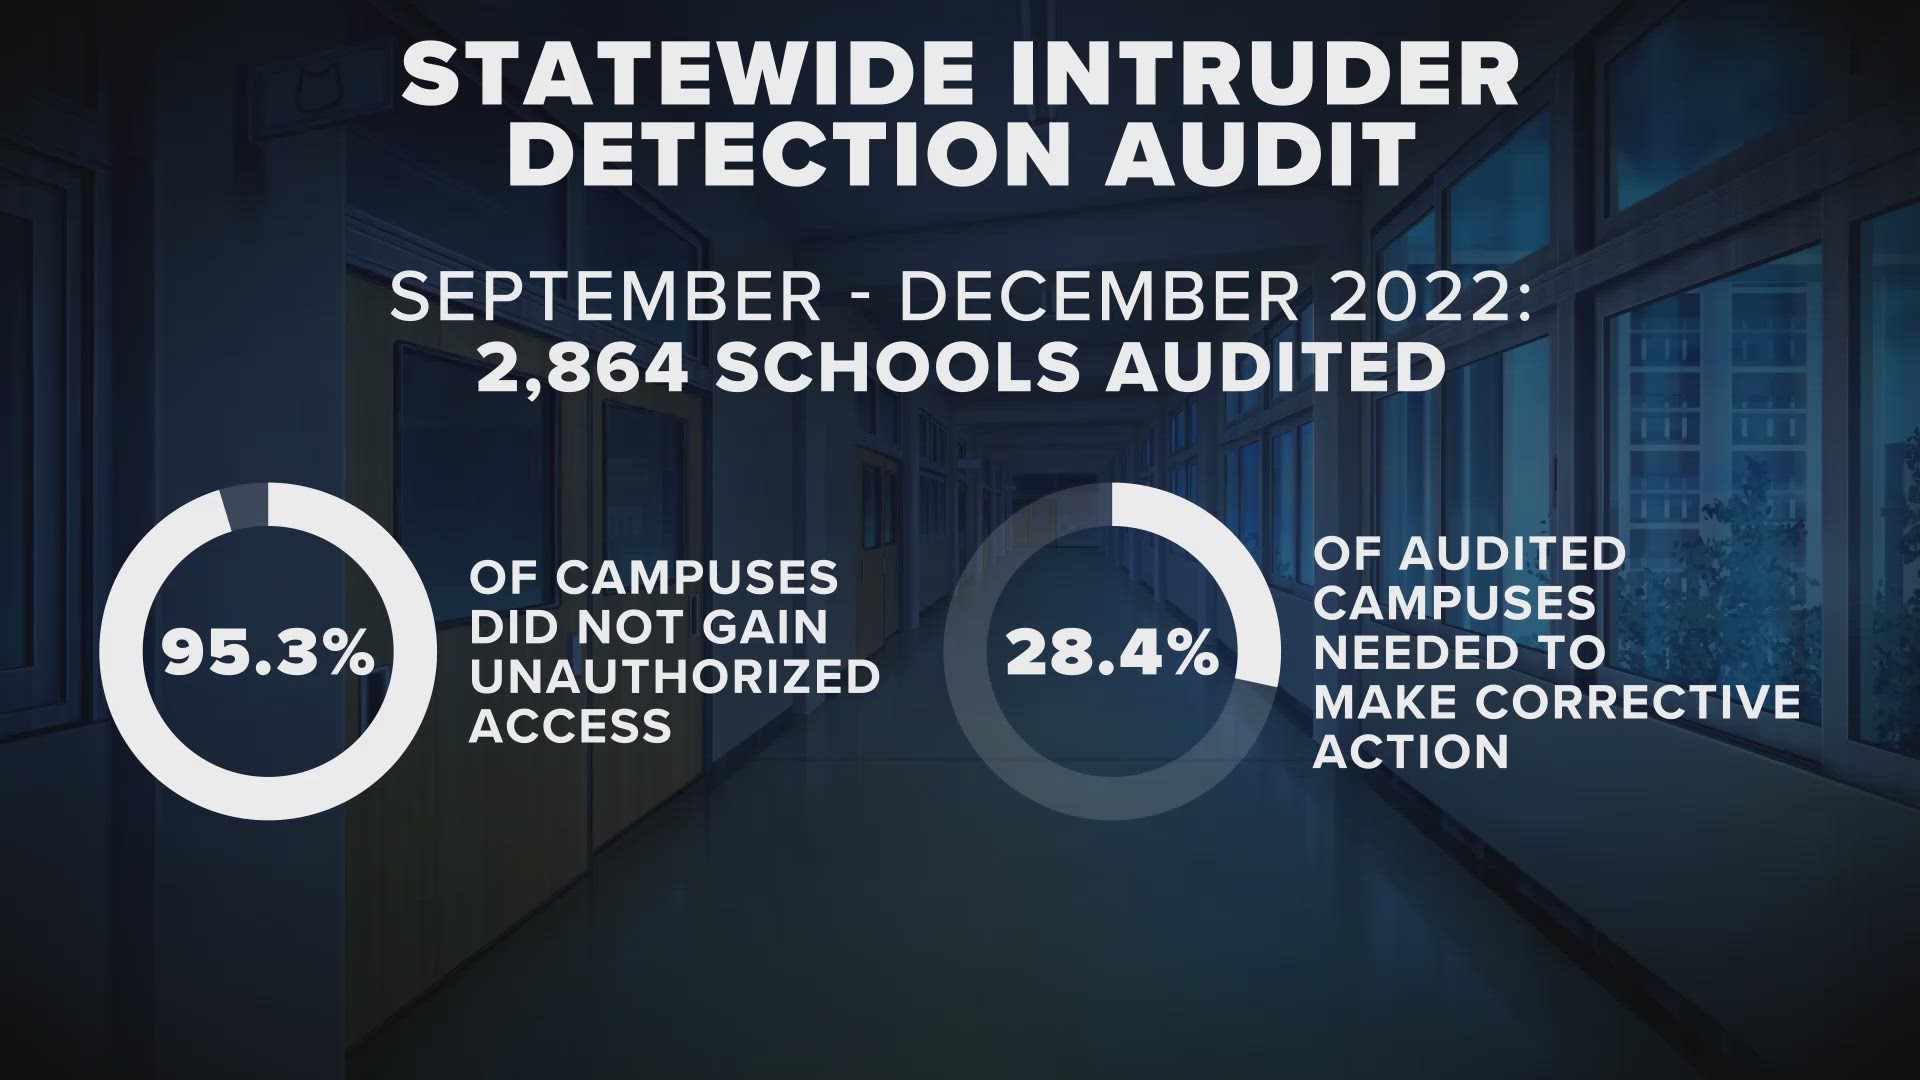 Following the mass shooting in Uvalde, an intruder detection audit was performed at Texas schools between September and December 2022.